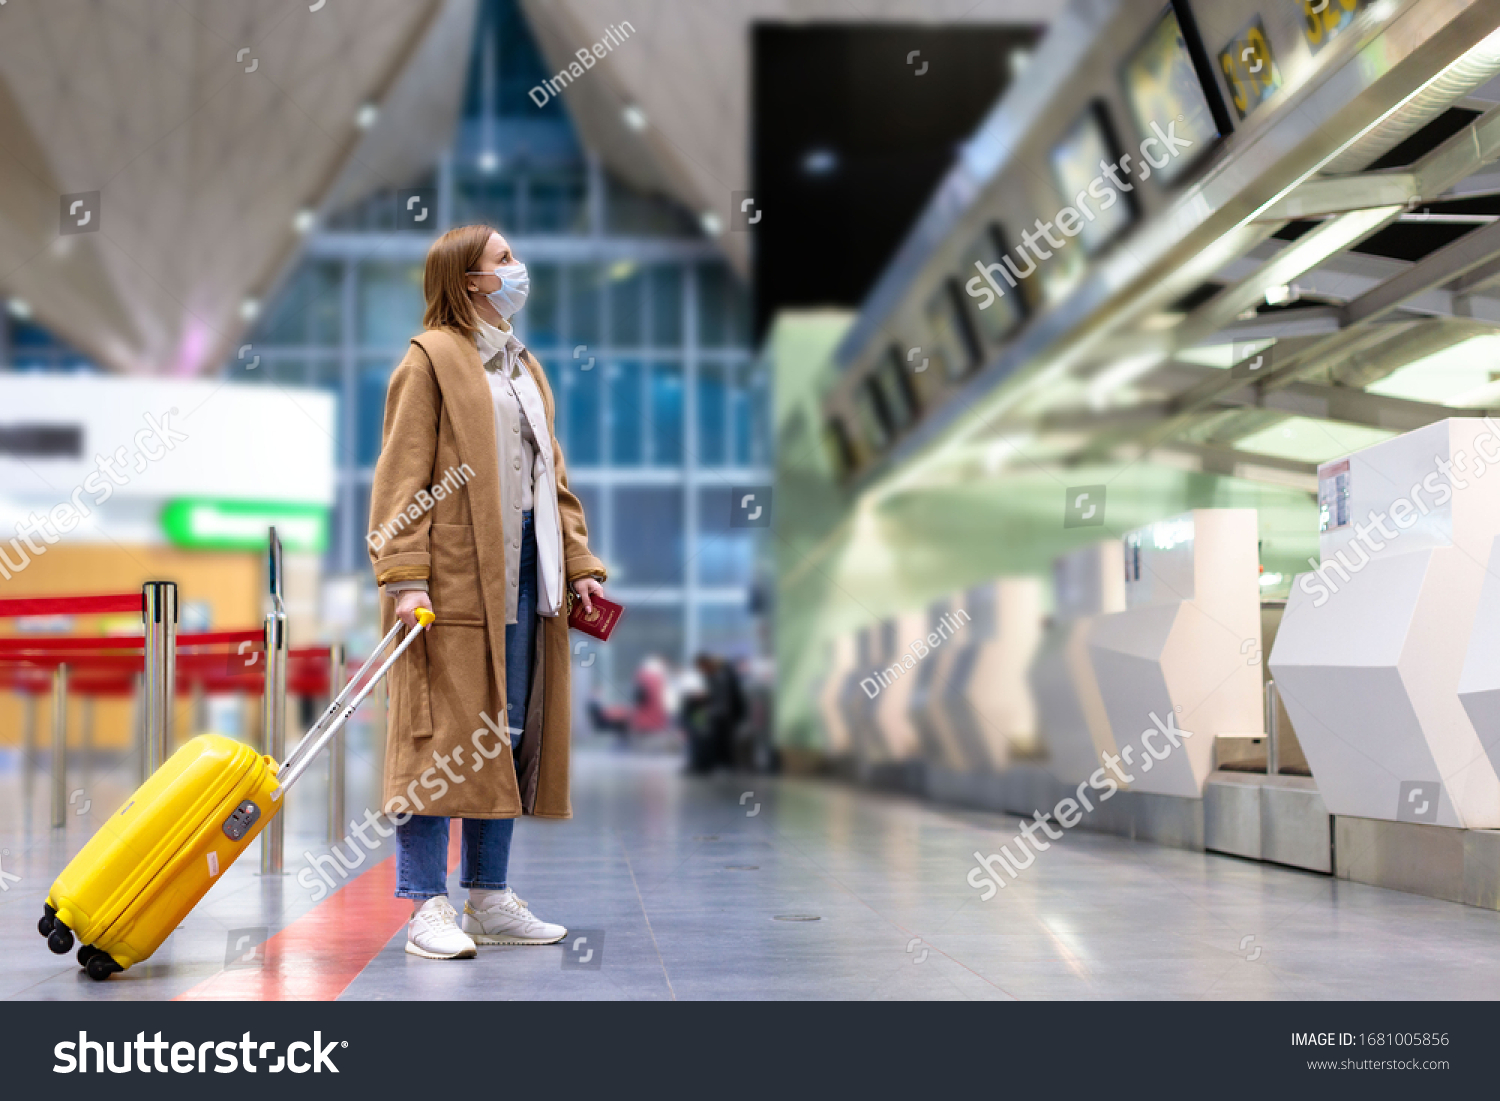 Woman with luggage stands at almost empty check-in counters at the airport terminal due to coronavirus pandemicCovid-19 outbreak travel restrictions. Flight cancellation.Quarantine all over the world #1681005856